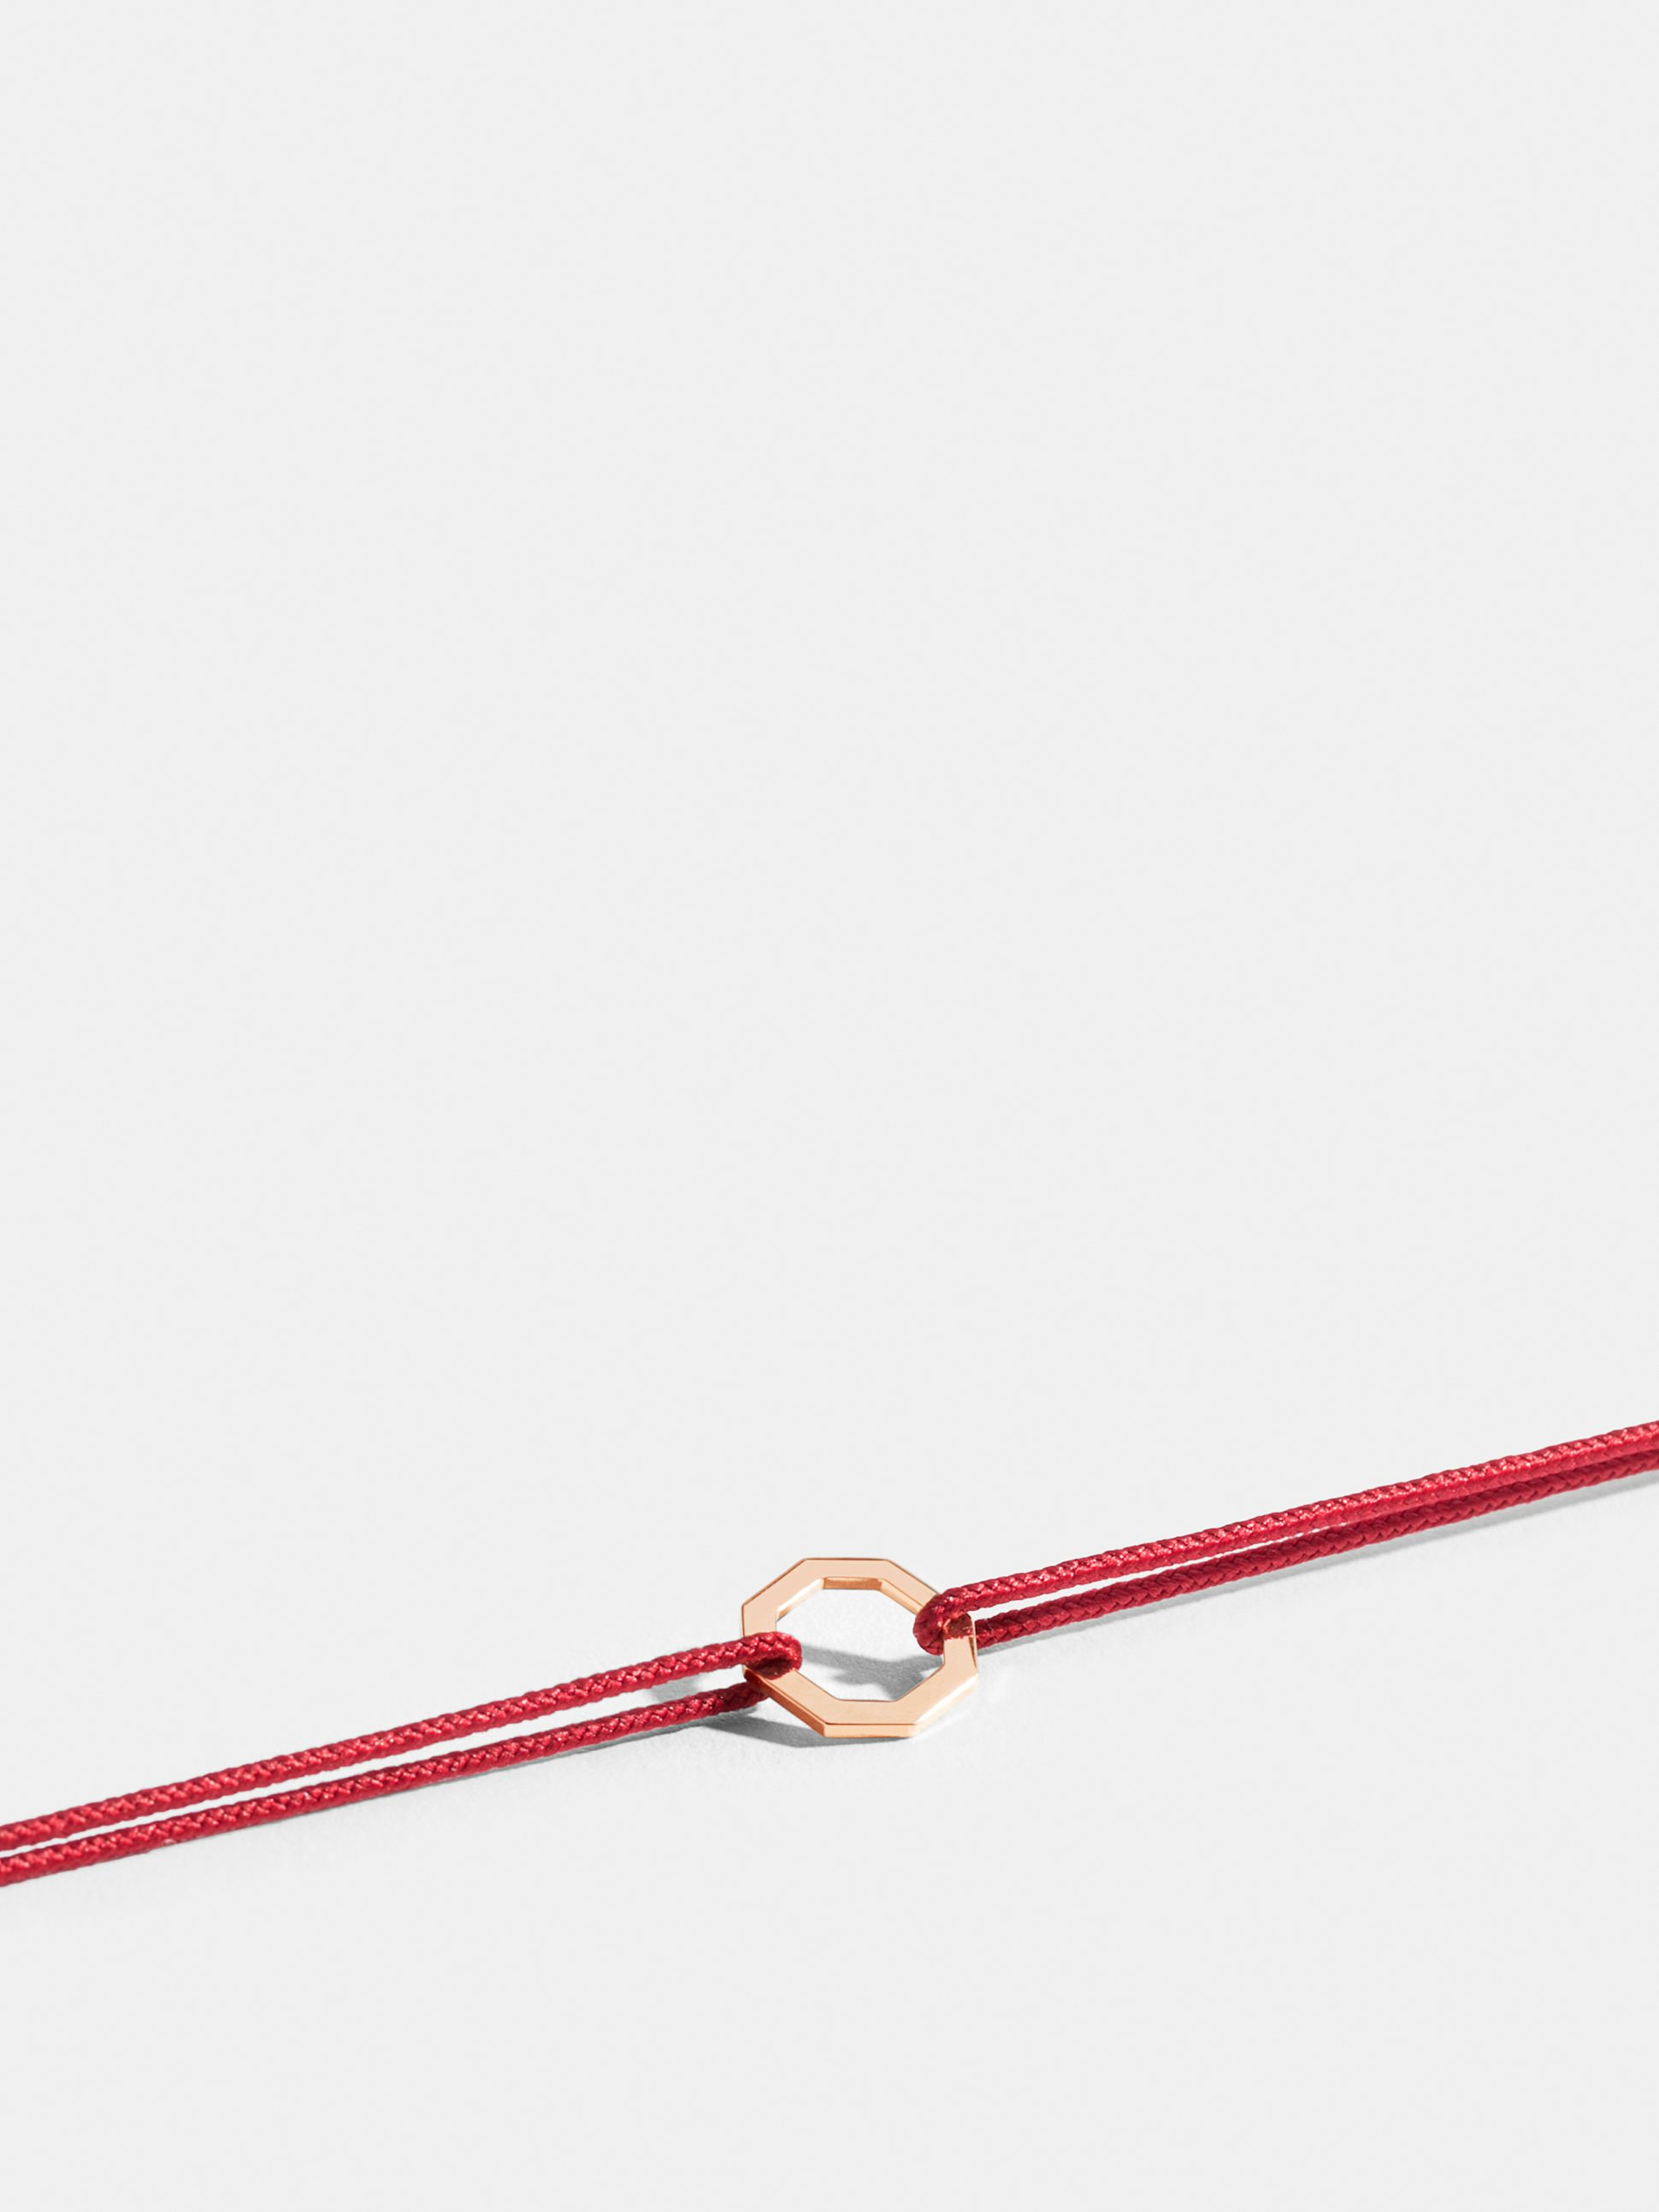 Octogone motif in 18k Fairmined ethical rose gold, on a poppy red cord. 